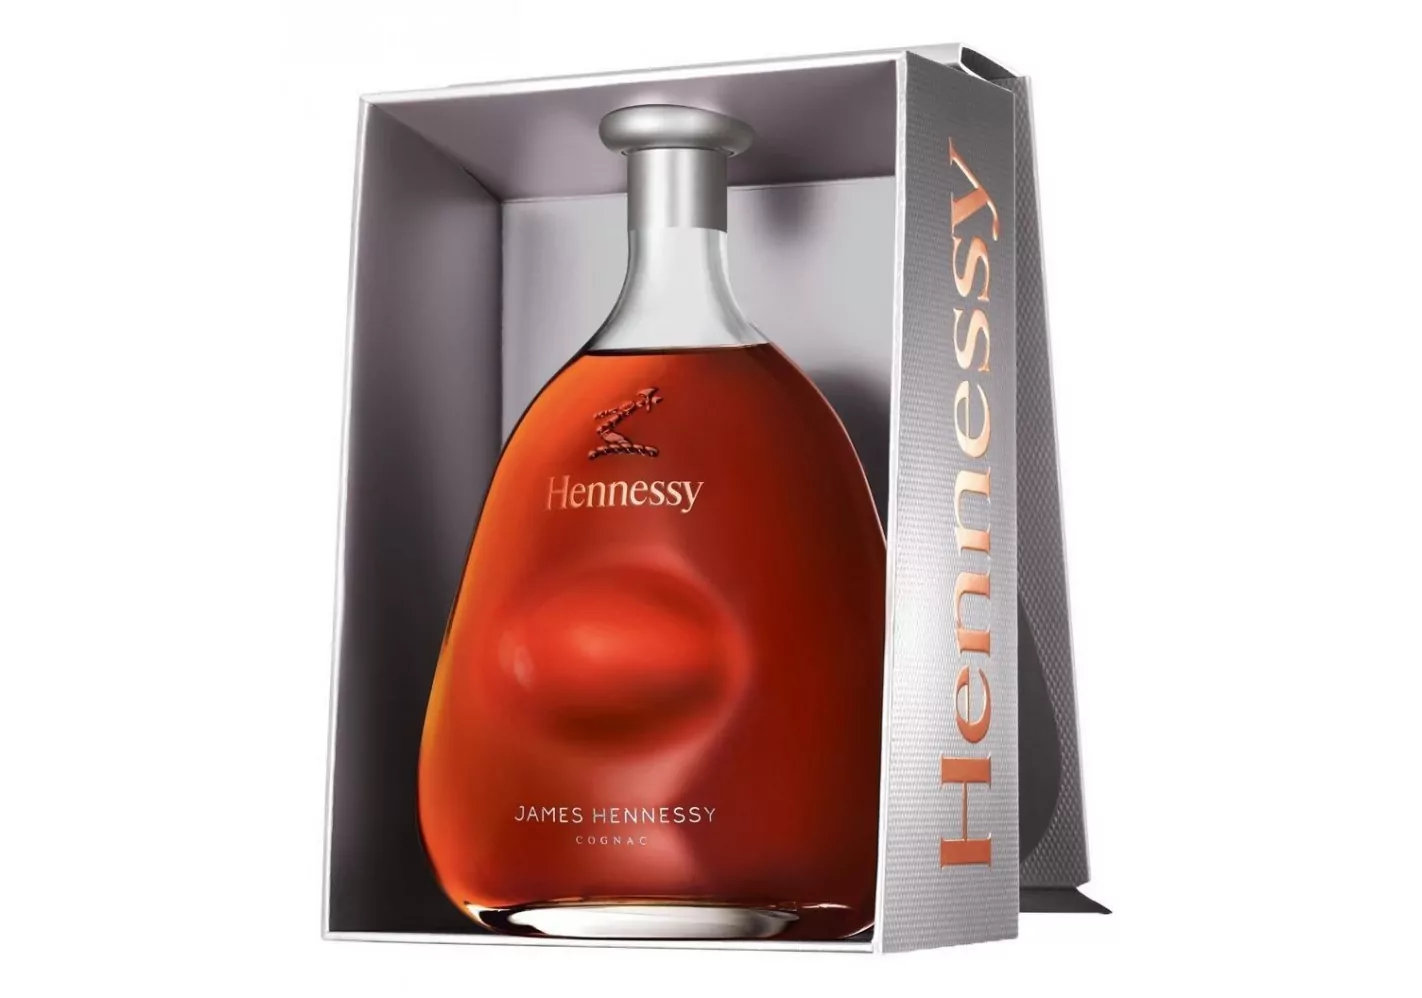 Hennessy James Hennessy Cognac - Buy Online on Cognac